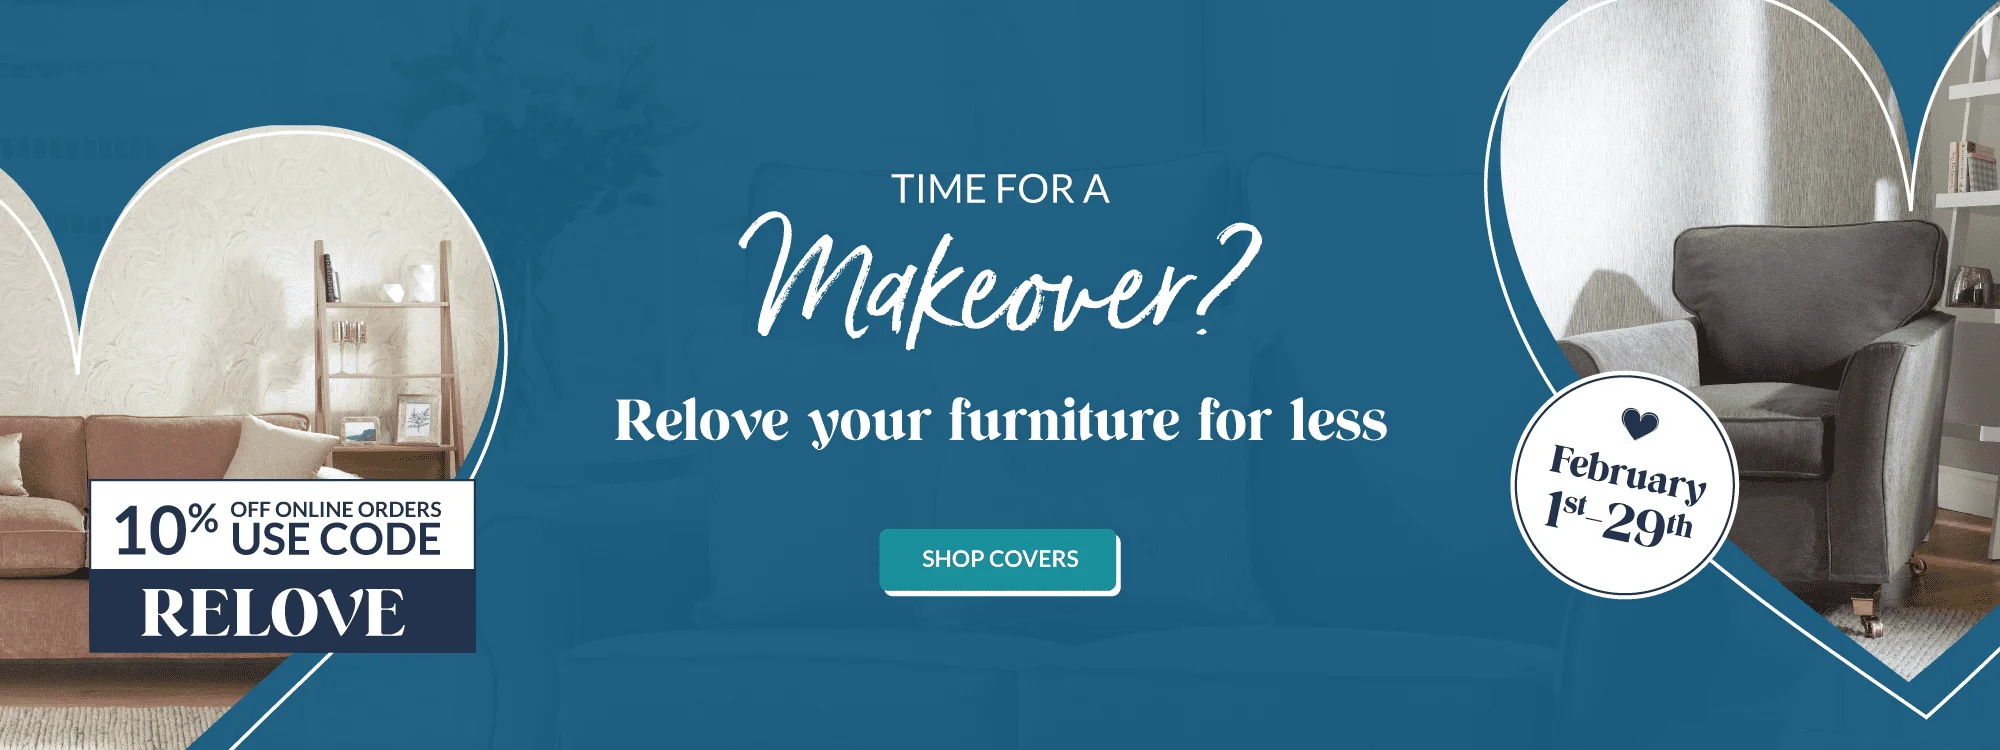 Time for a makeover? Relove your furniture for less